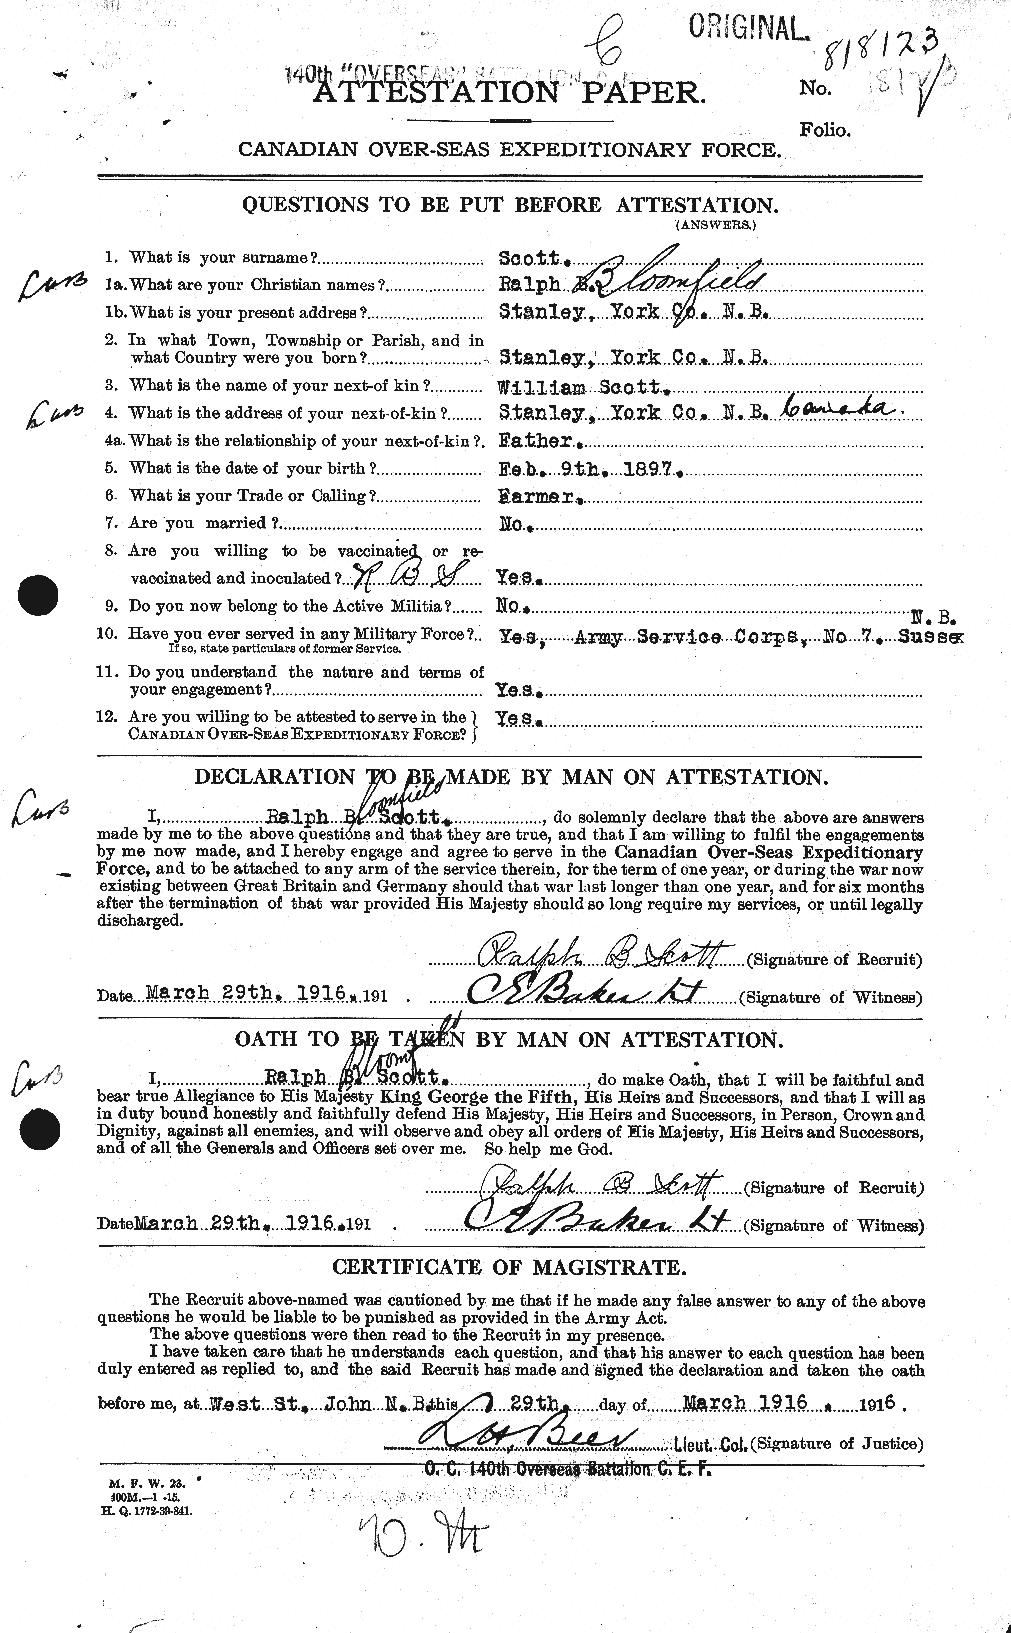 Personnel Records of the First World War - CEF 090207a